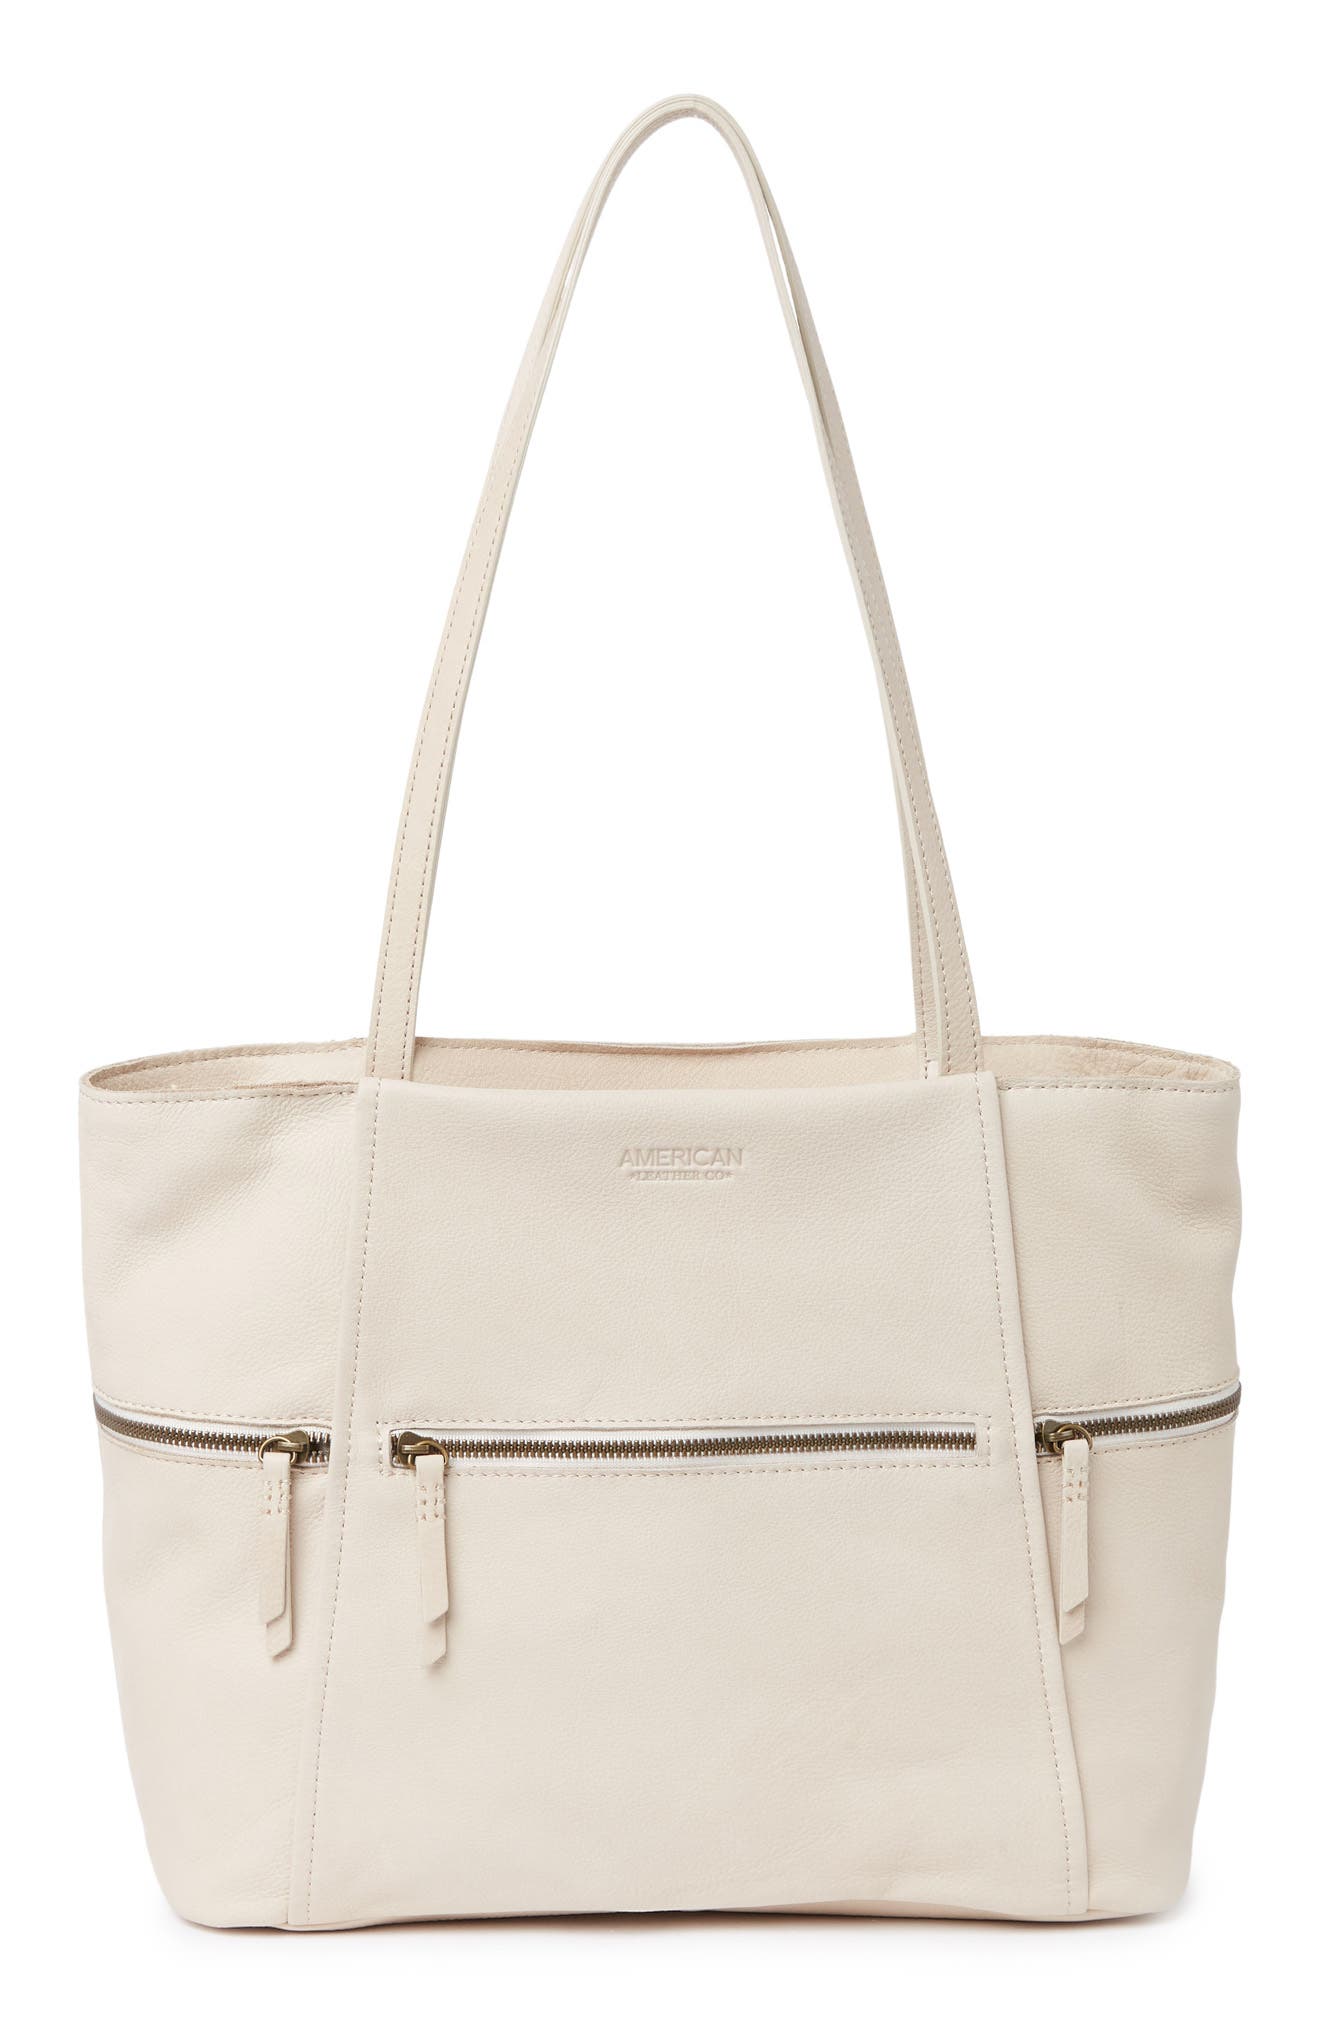 American Leather Co. Eerie Smooth Leather Tote Bag In Stone Smooth